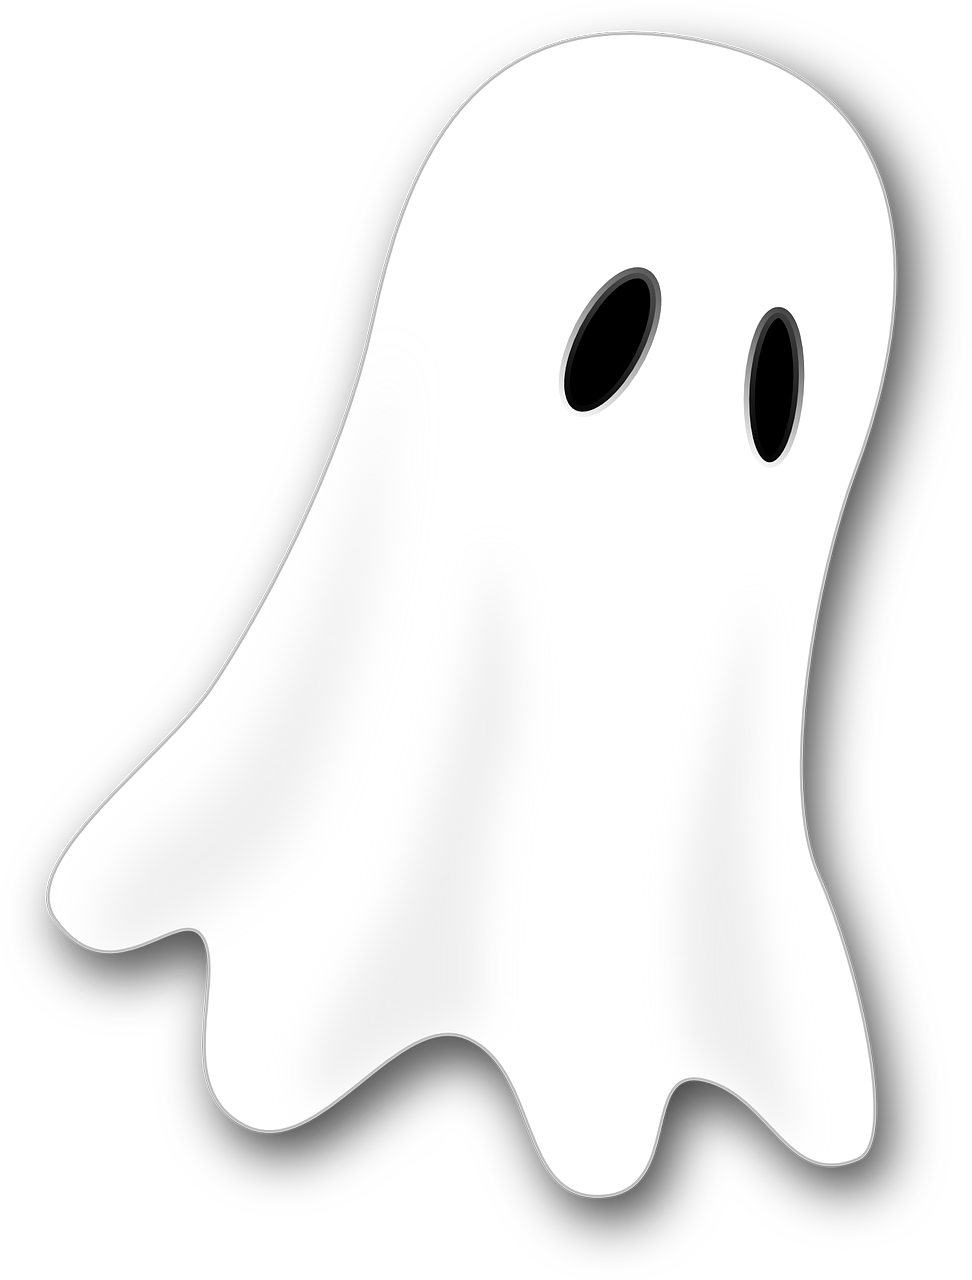 Ghost,boo,halloween,spooky,haunted - free image from needpix.com